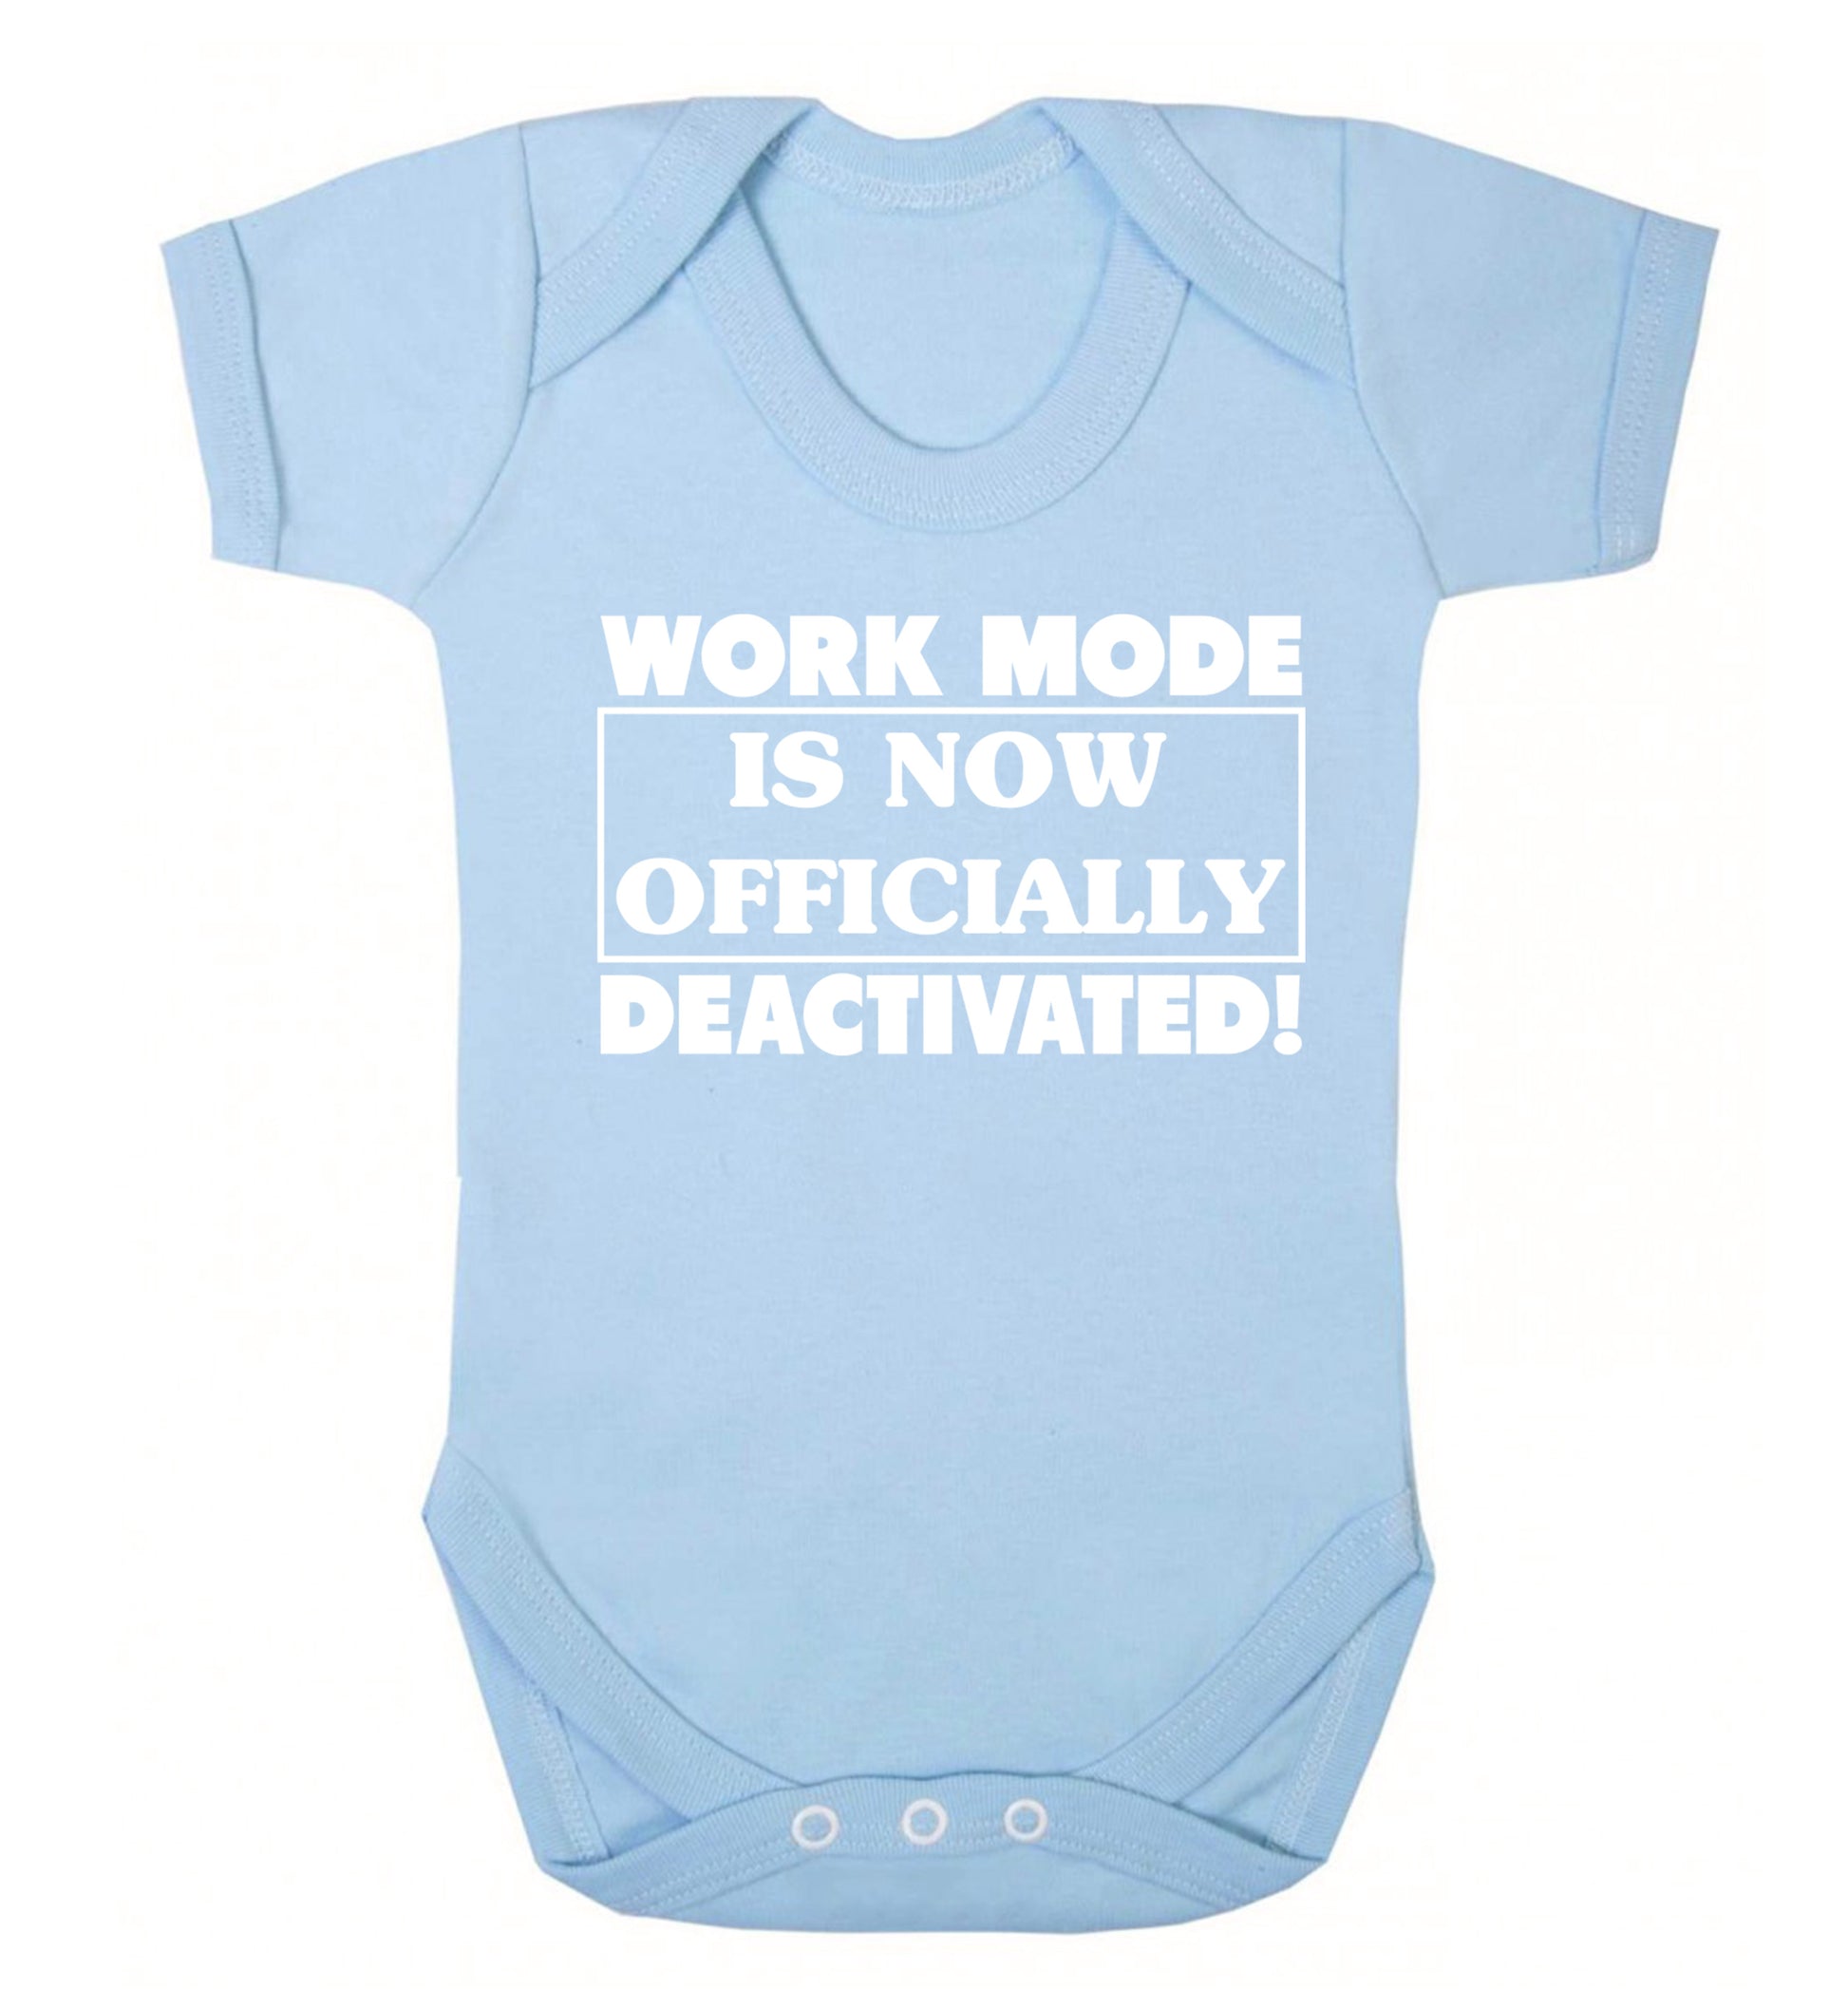 Work mode is now officially deactivated Baby Vest pale blue 18-24 months